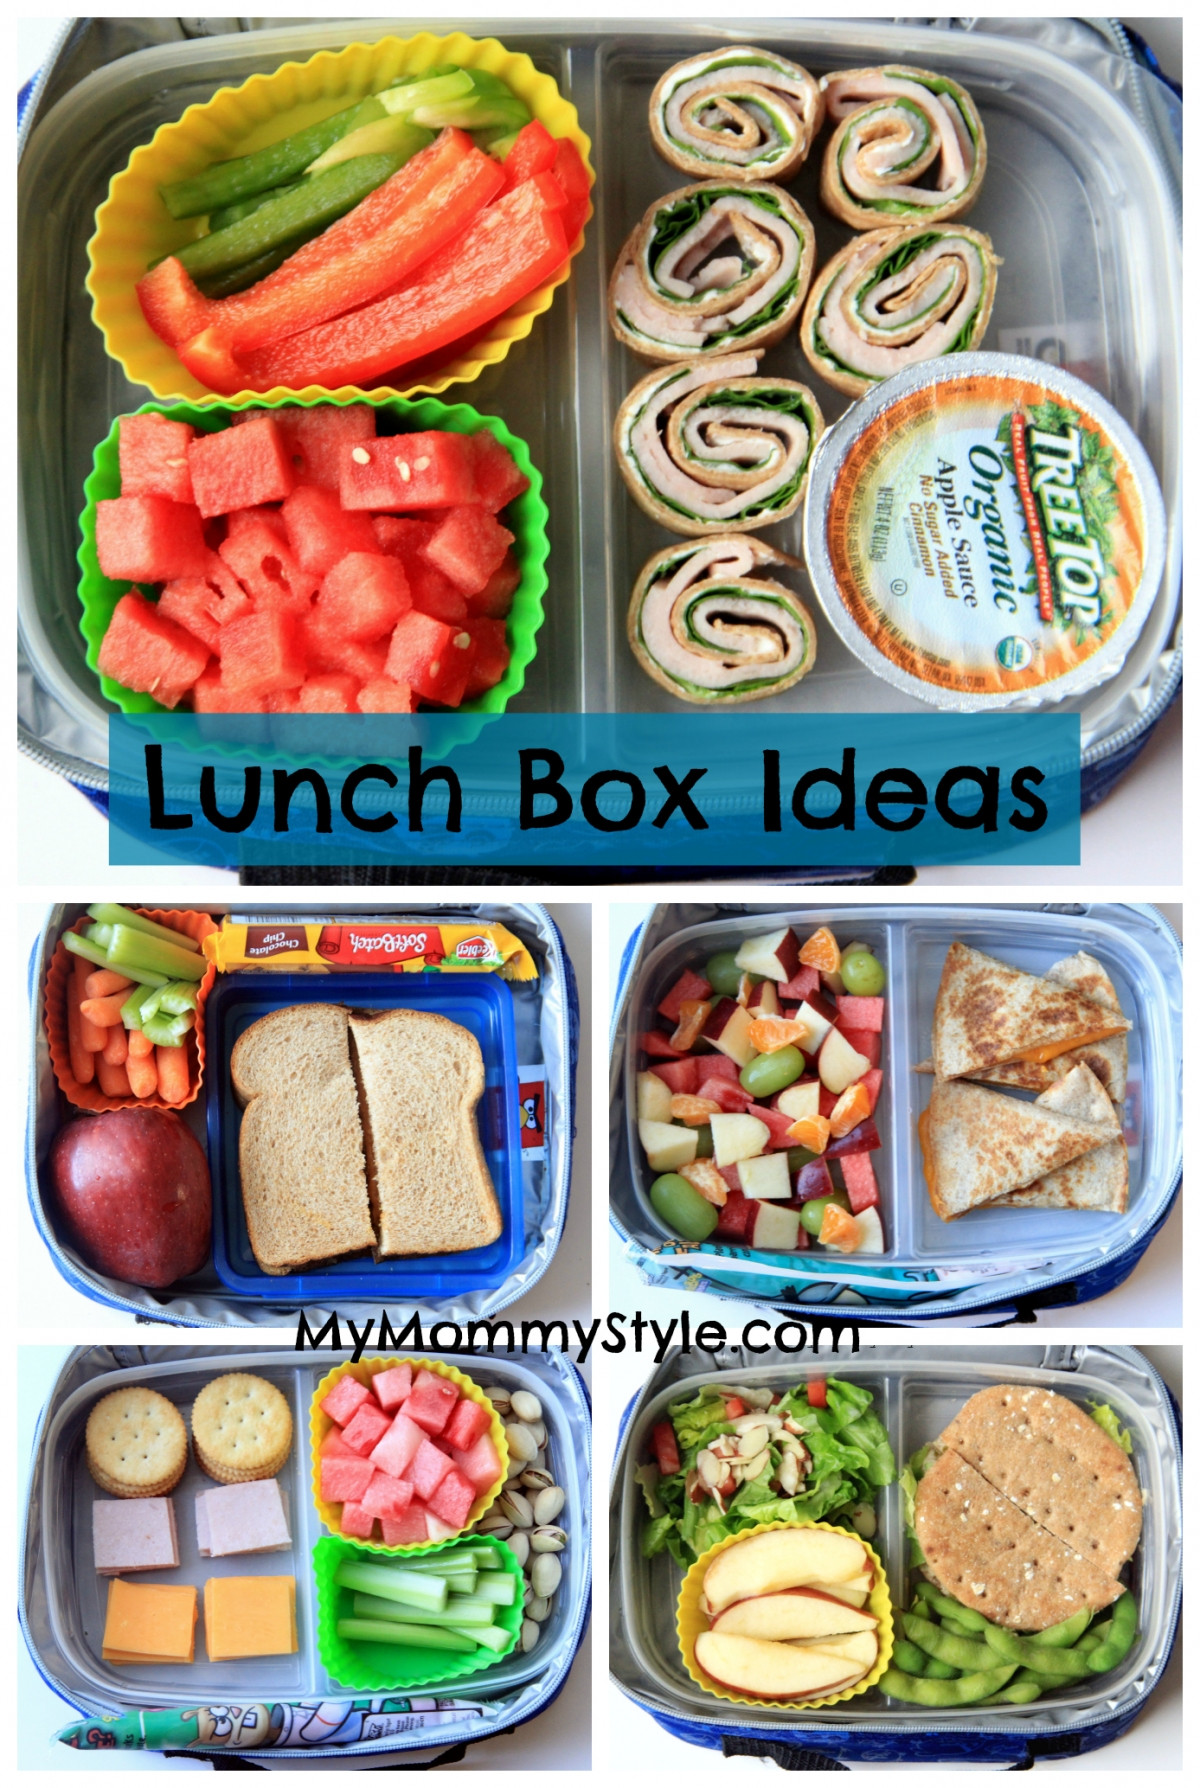 Healthy Kids Lunches
 Healthy Lunch Box ideas week 2 My Mommy Style